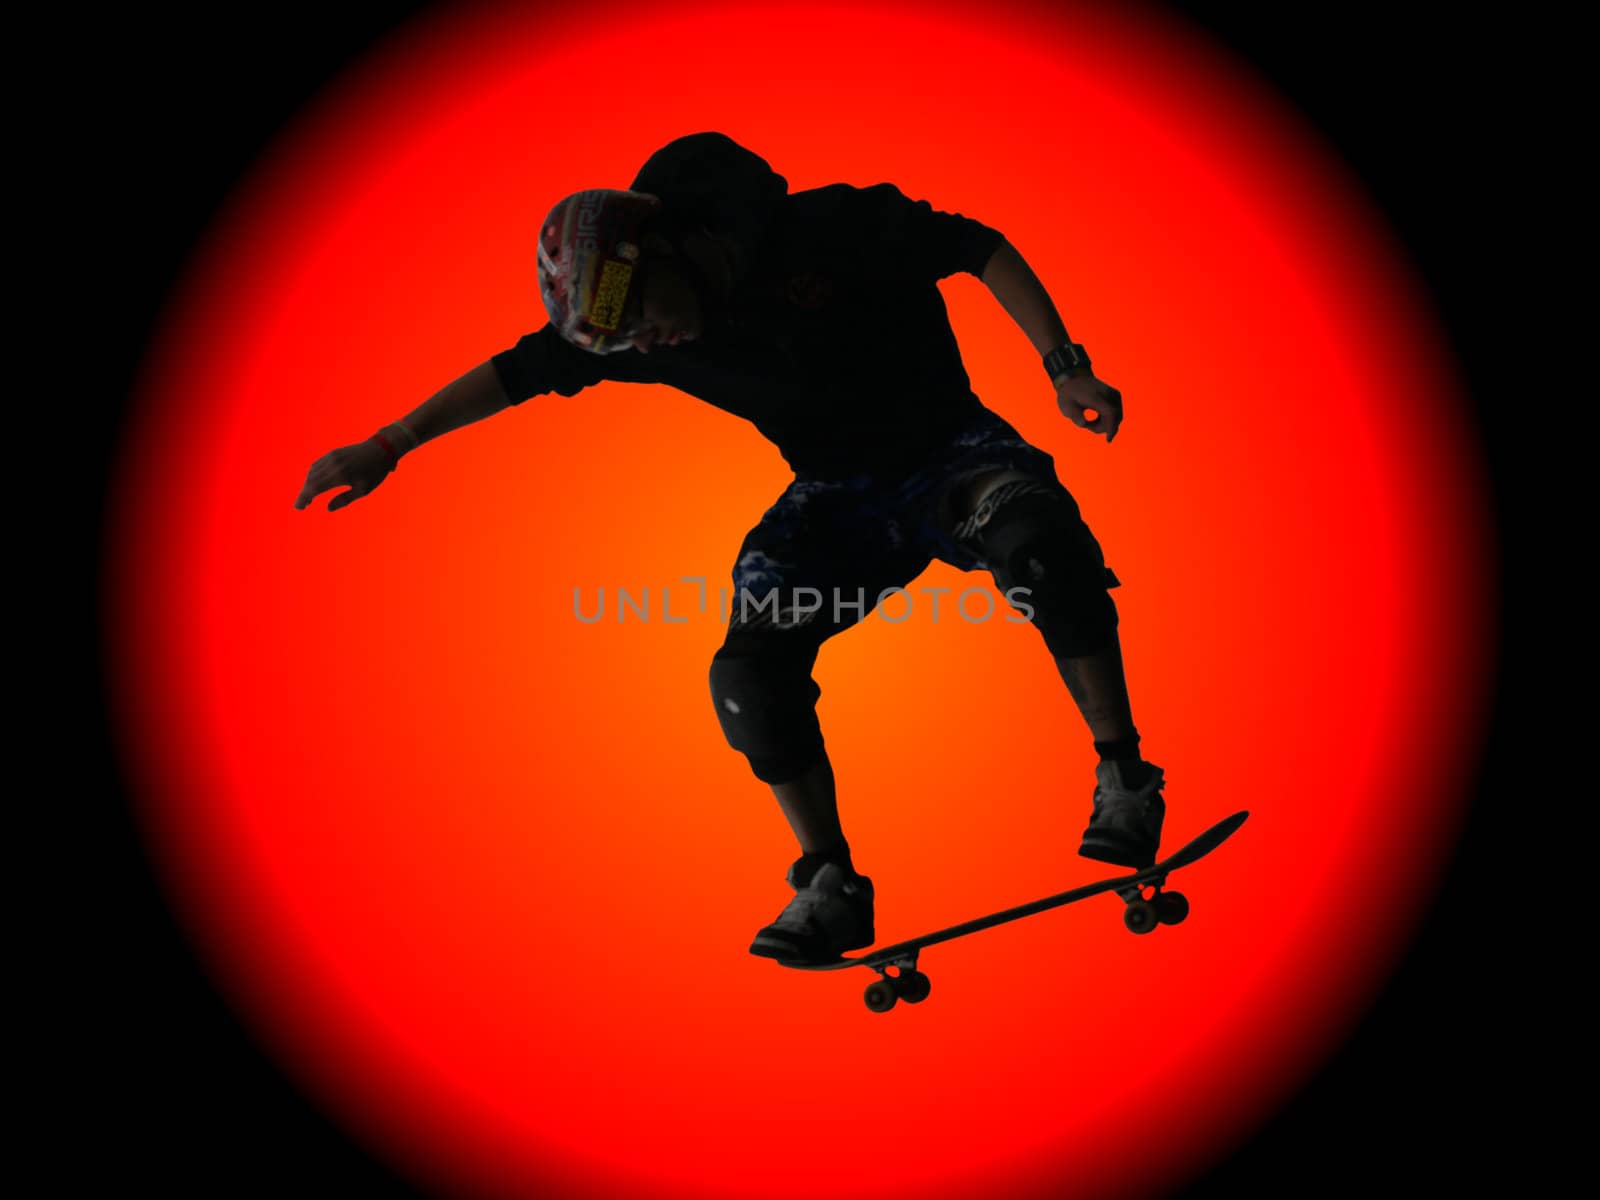 Skateboarder silhouetted against a huge sun by illu